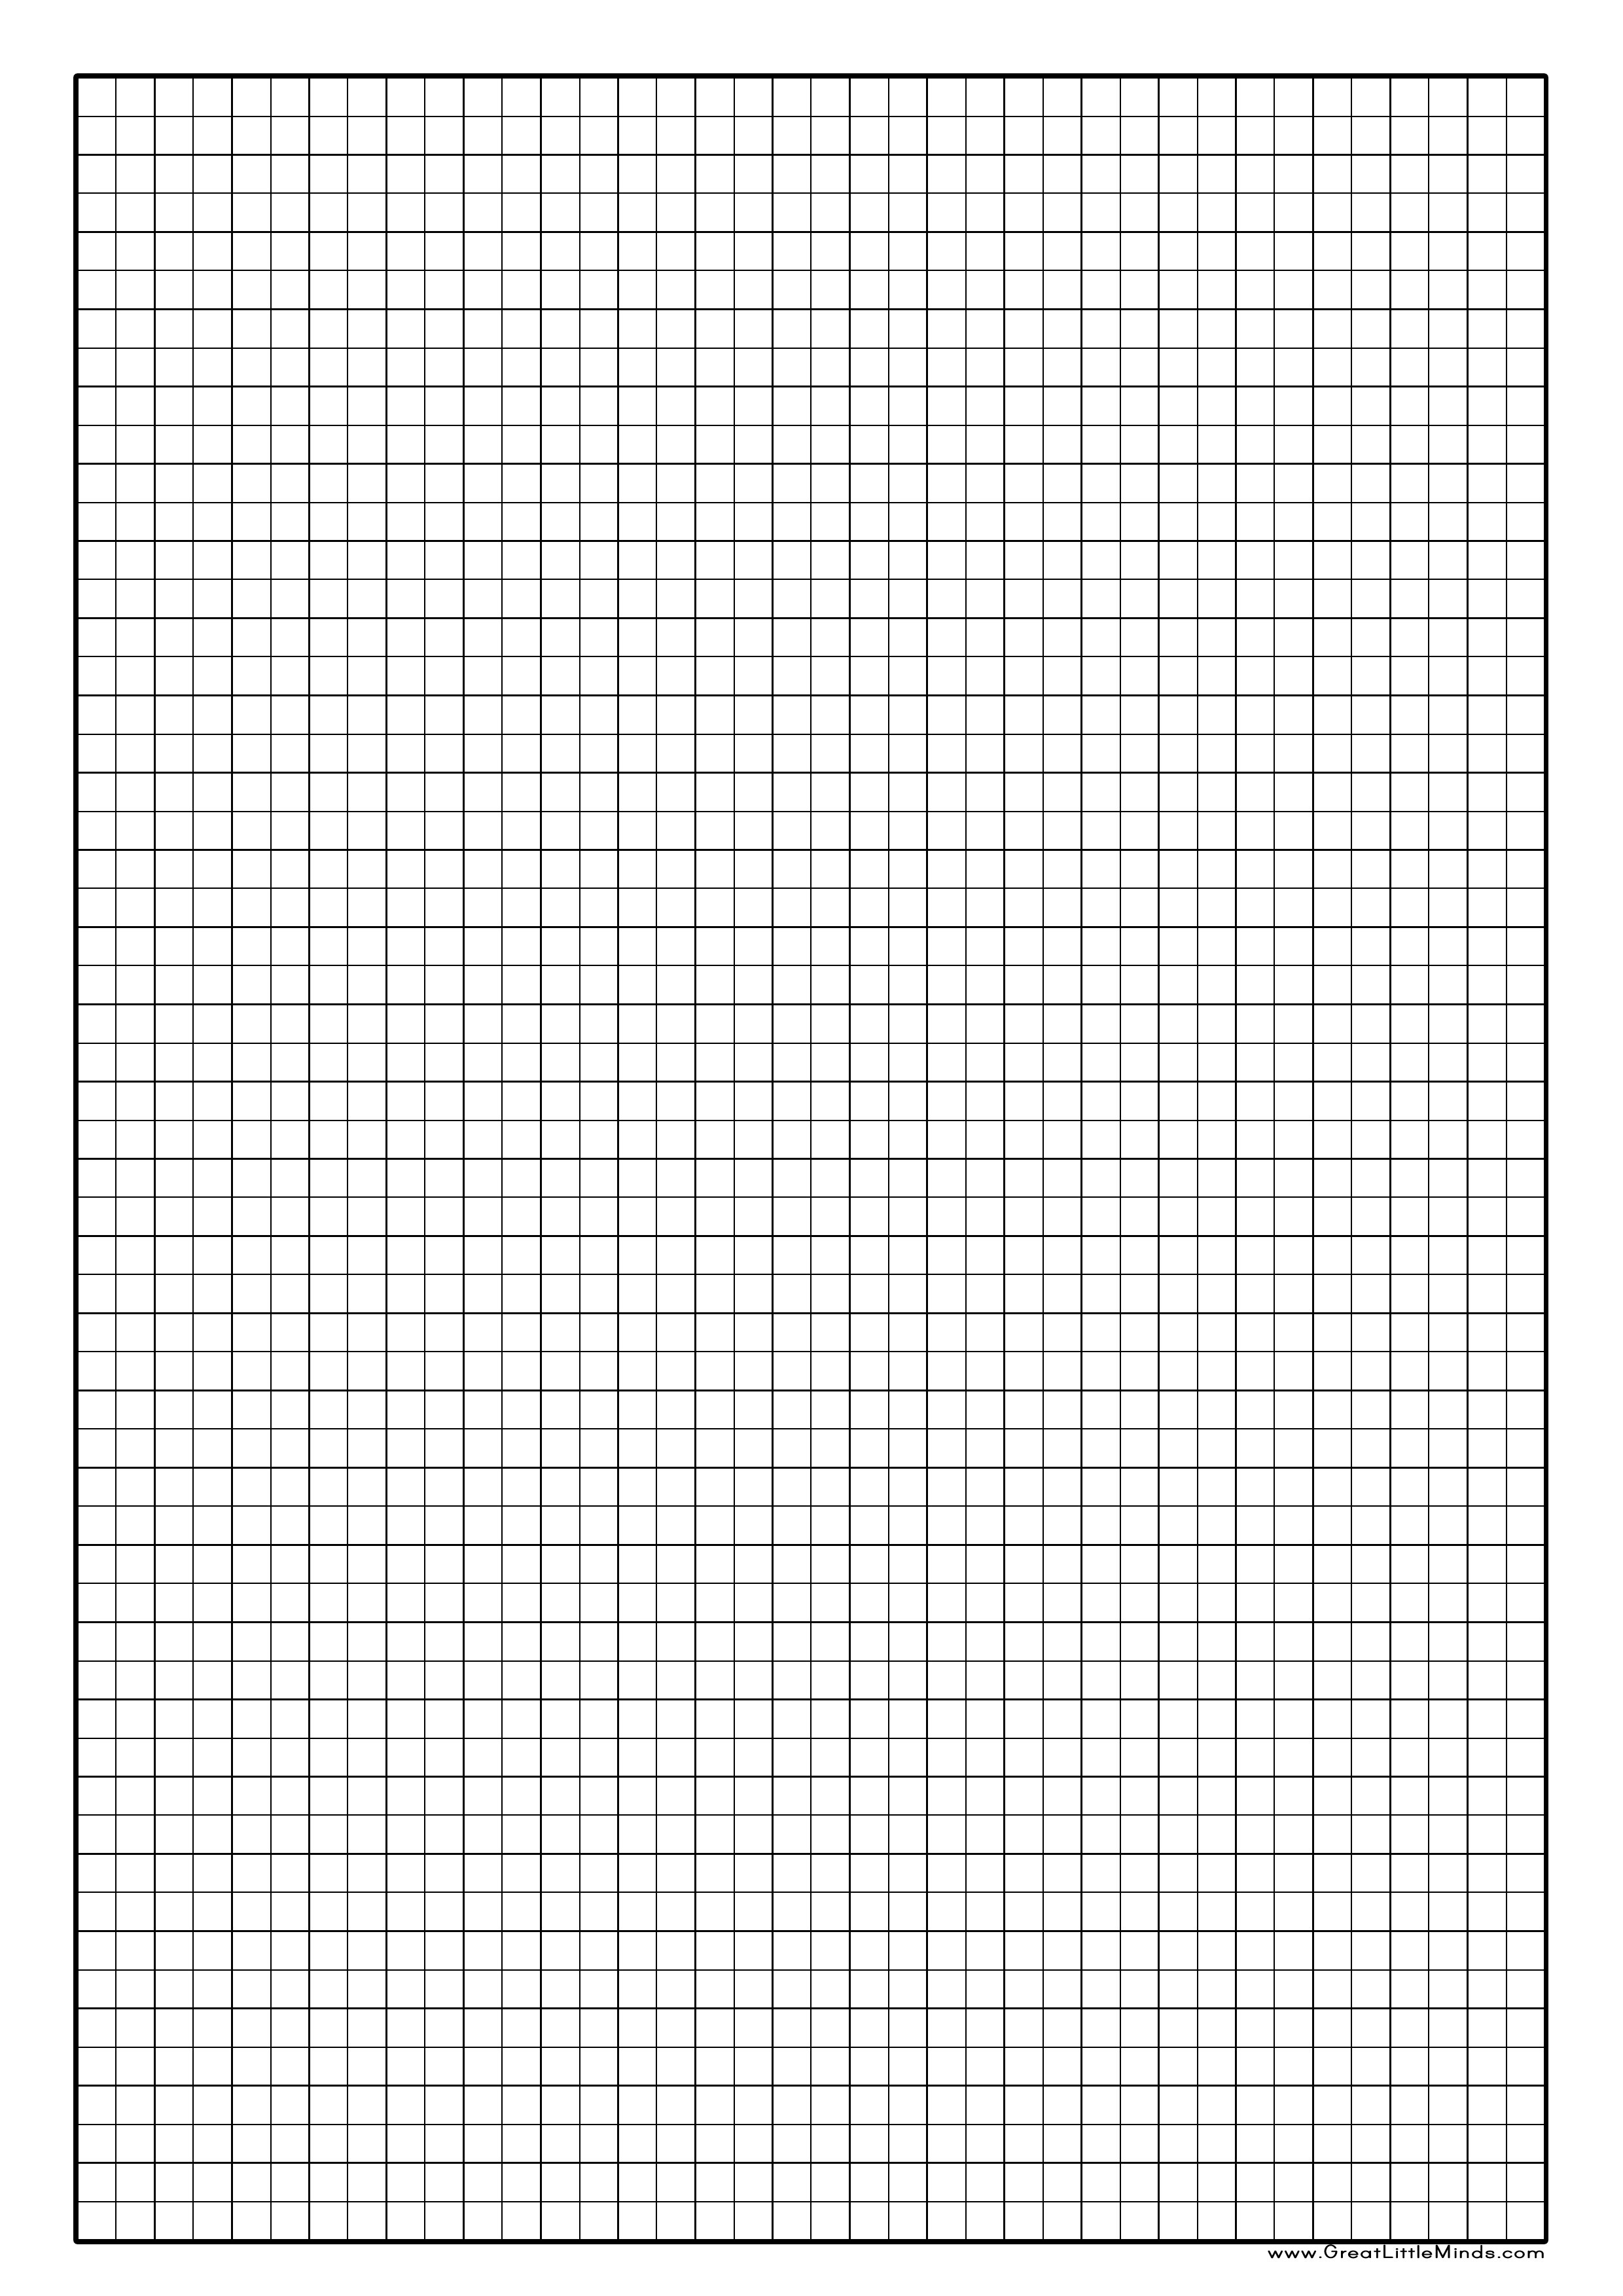 Graph Paper To Print - 5Mm Squared Paper - Free Printable Squared Paper